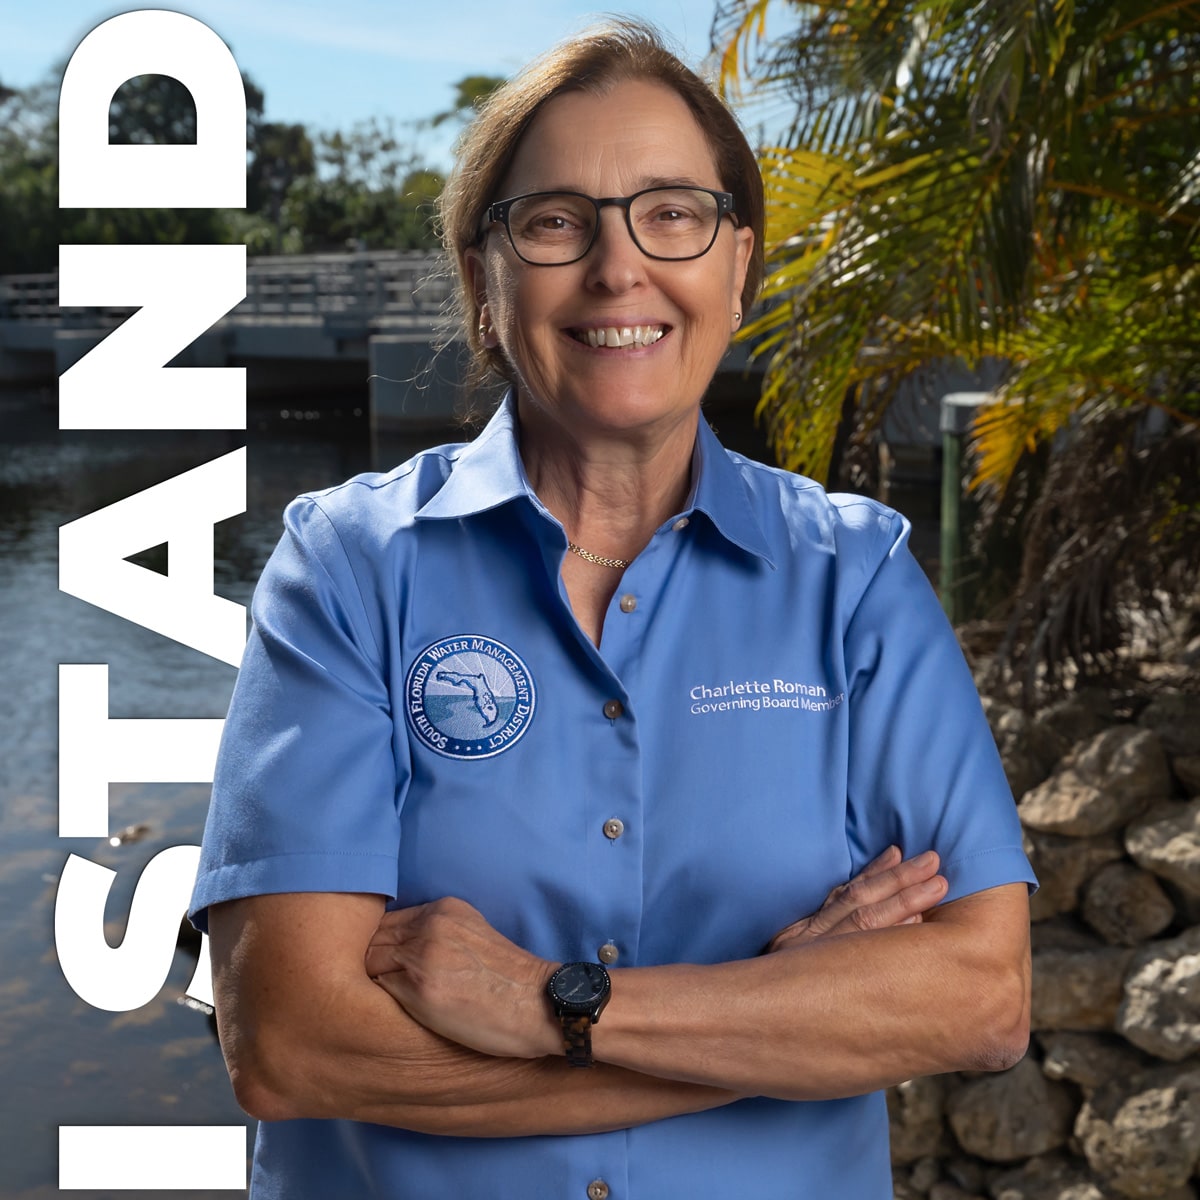 Charlette Roman - Board Chair of South Florida Water Management District - standing in front of a canal and the words "I Stand" behind her.